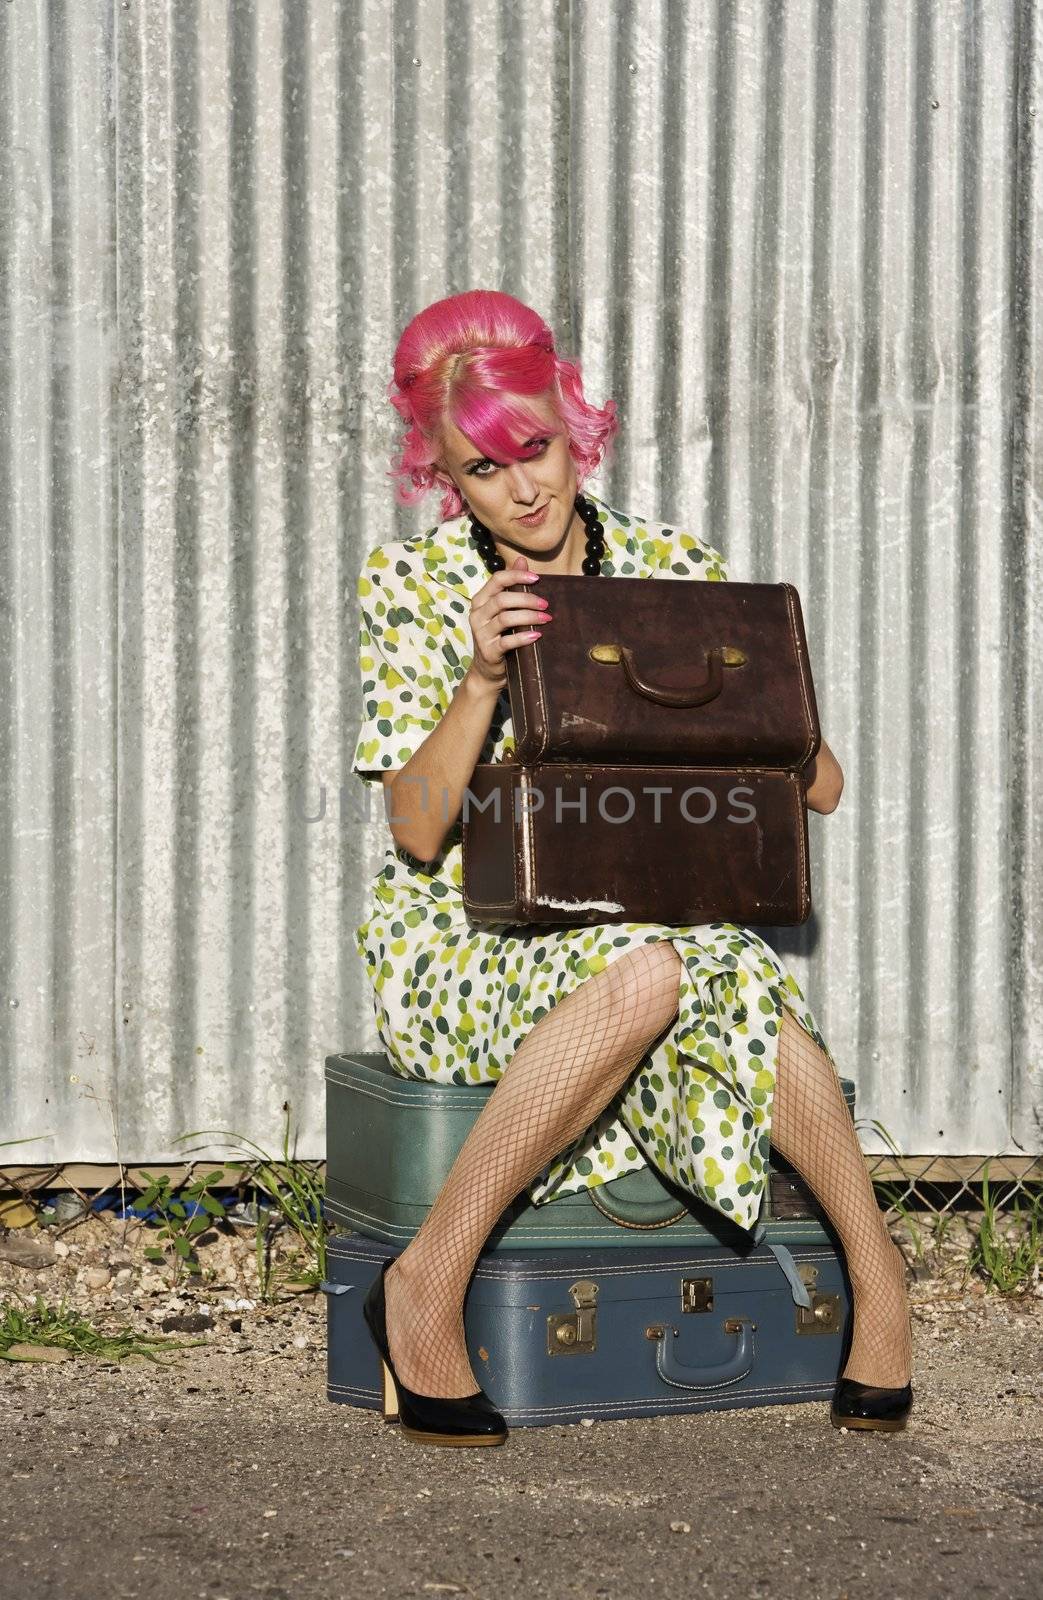 Woman with pink hair wearing polka dot dress in alley with suitcases